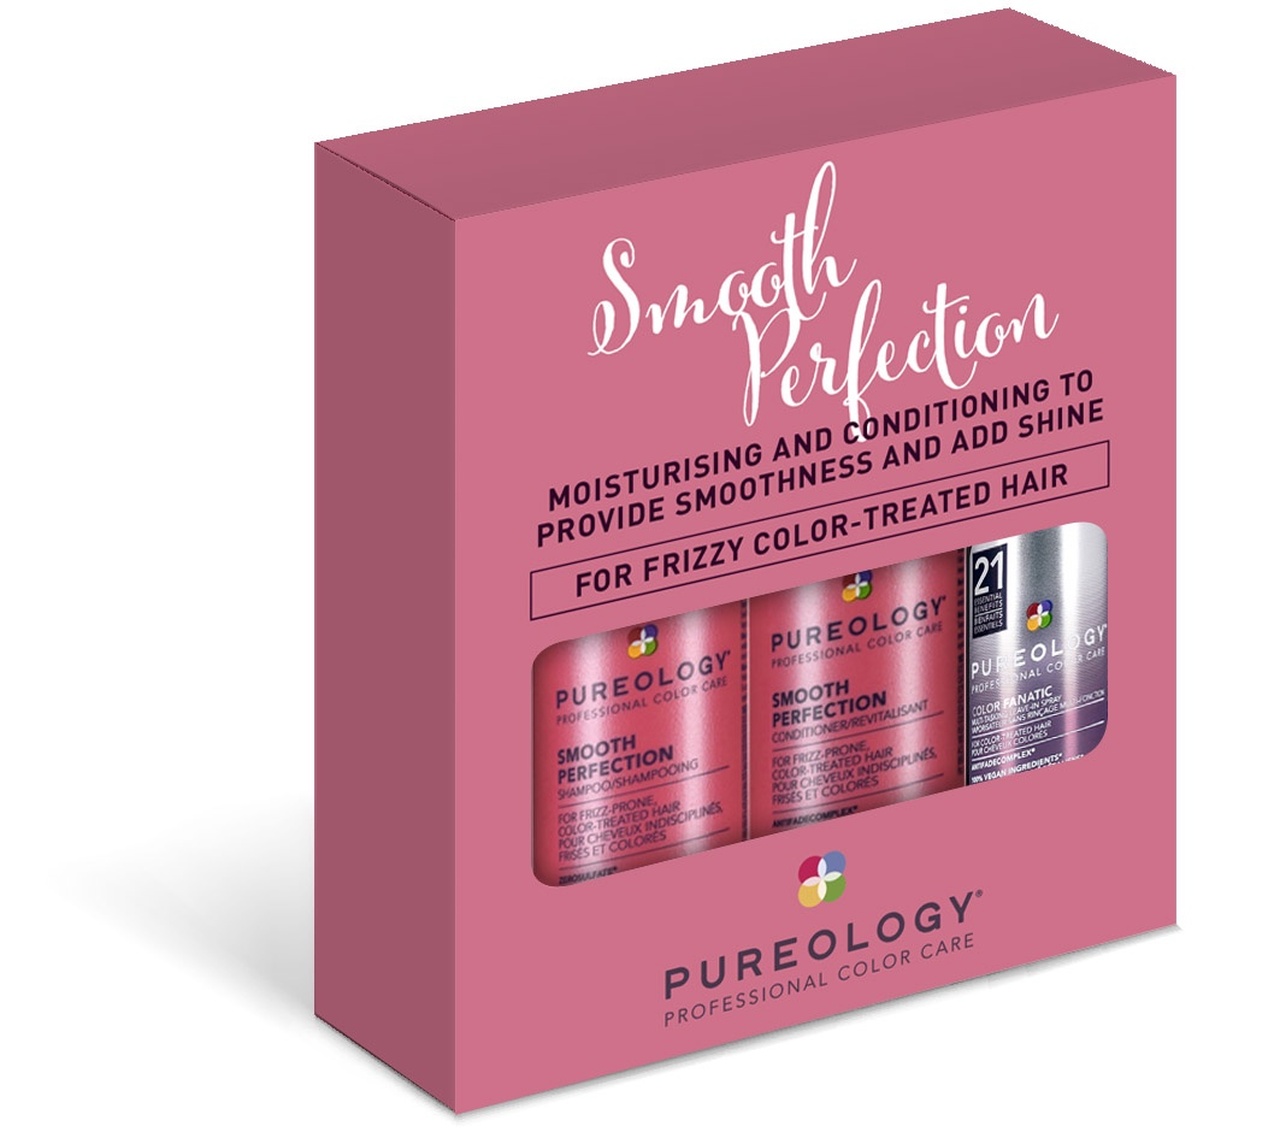 Pureology Mini Trio Pack - Smooth Perfection